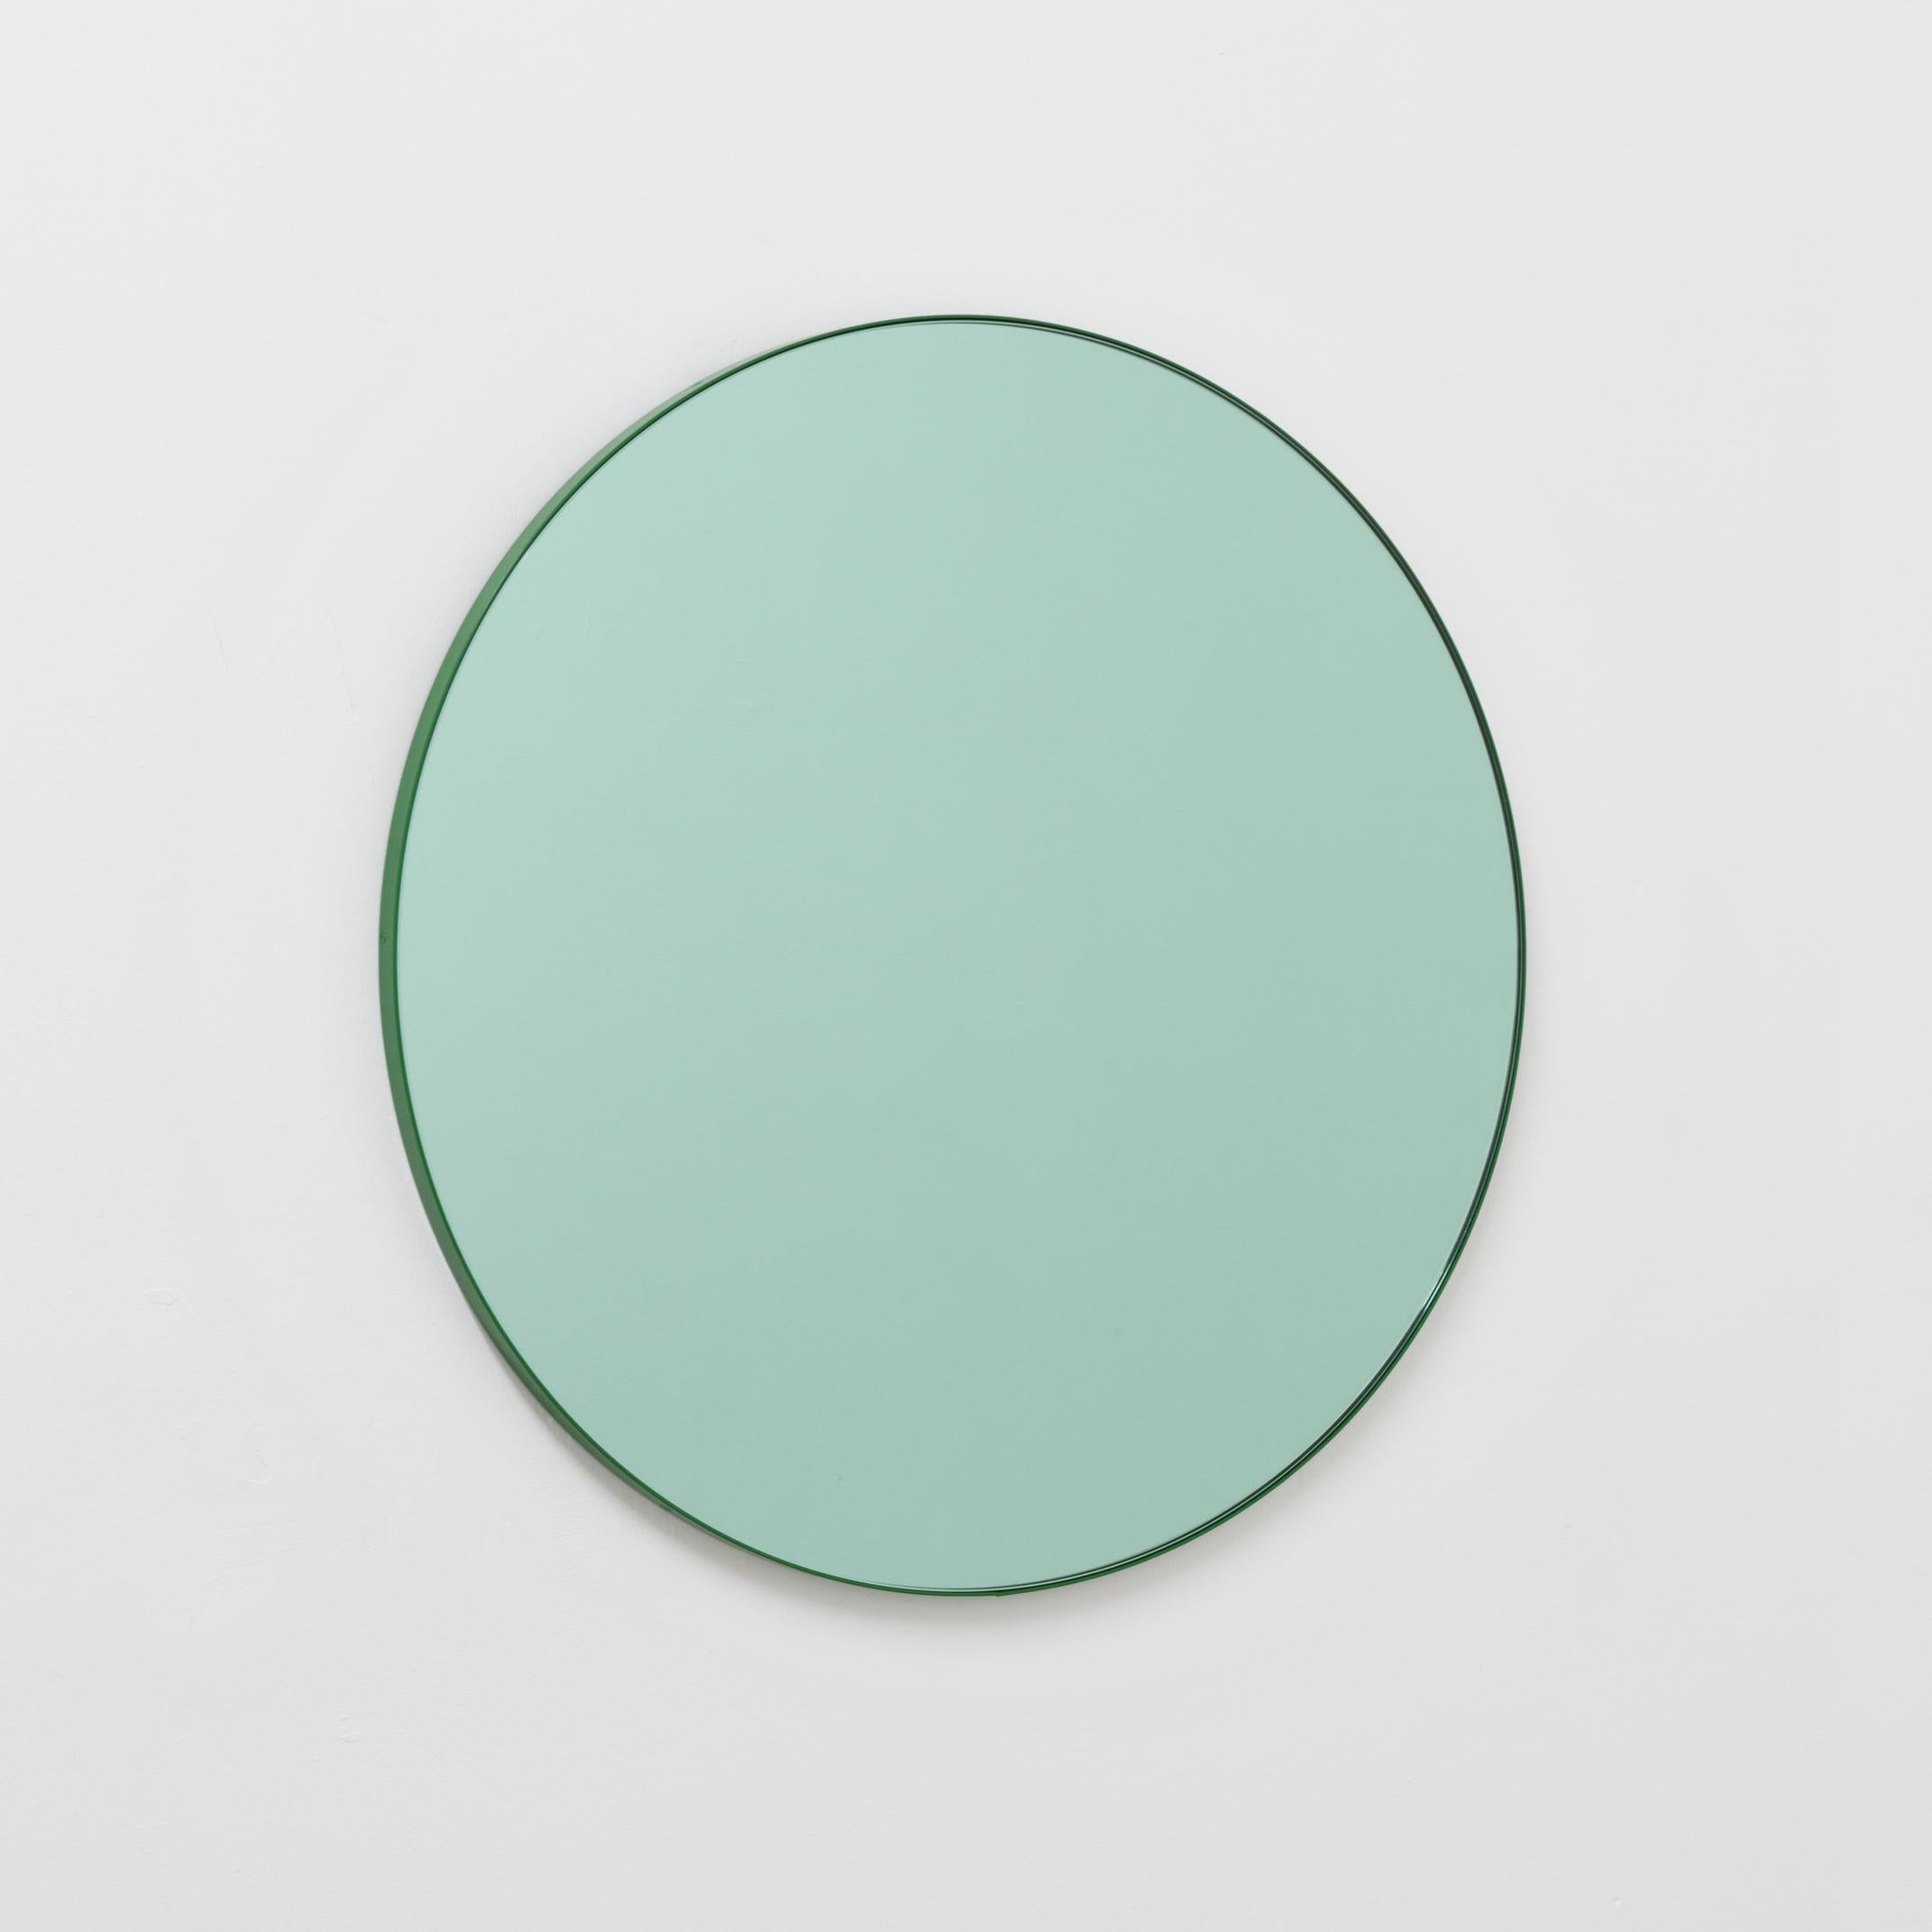 Delightful round green tinted mirror with a colorful green powder-coated aluminium frame.

Designed and handcrafted in London, UK. The detailing and finish, including visible brass screws, emphasize the craft and quality feel of the mirror, a true